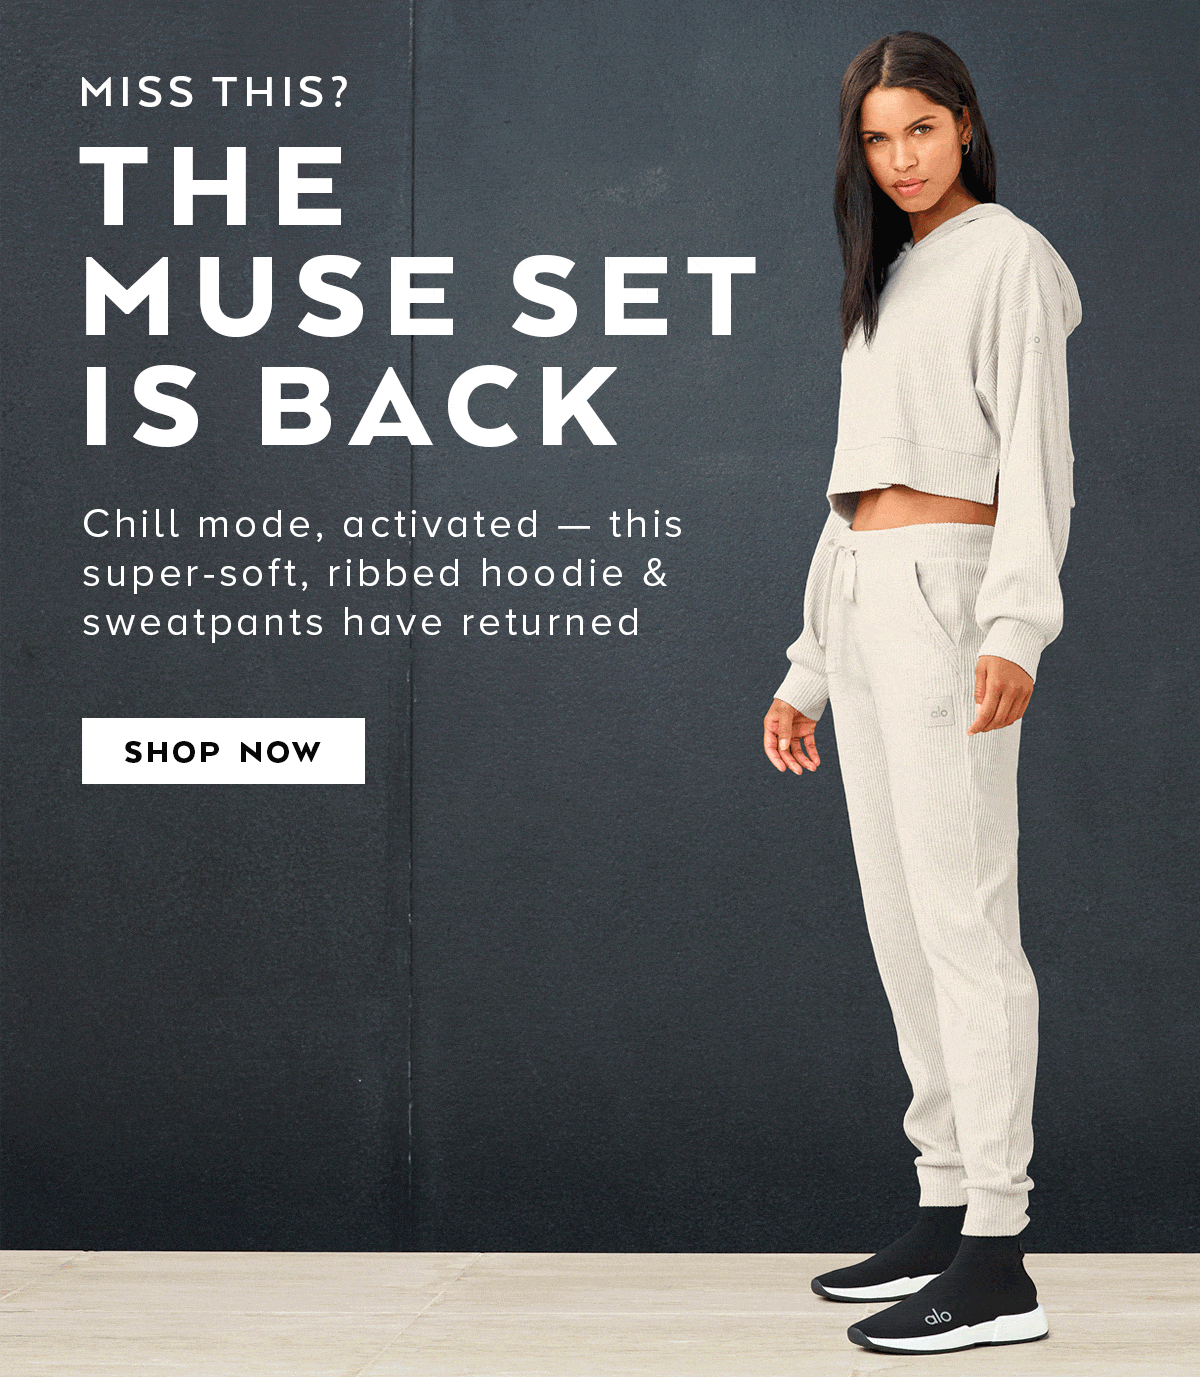 Alo Yoga: 💖 BACK IN STOCK! THE MUSE SET OMG 💖